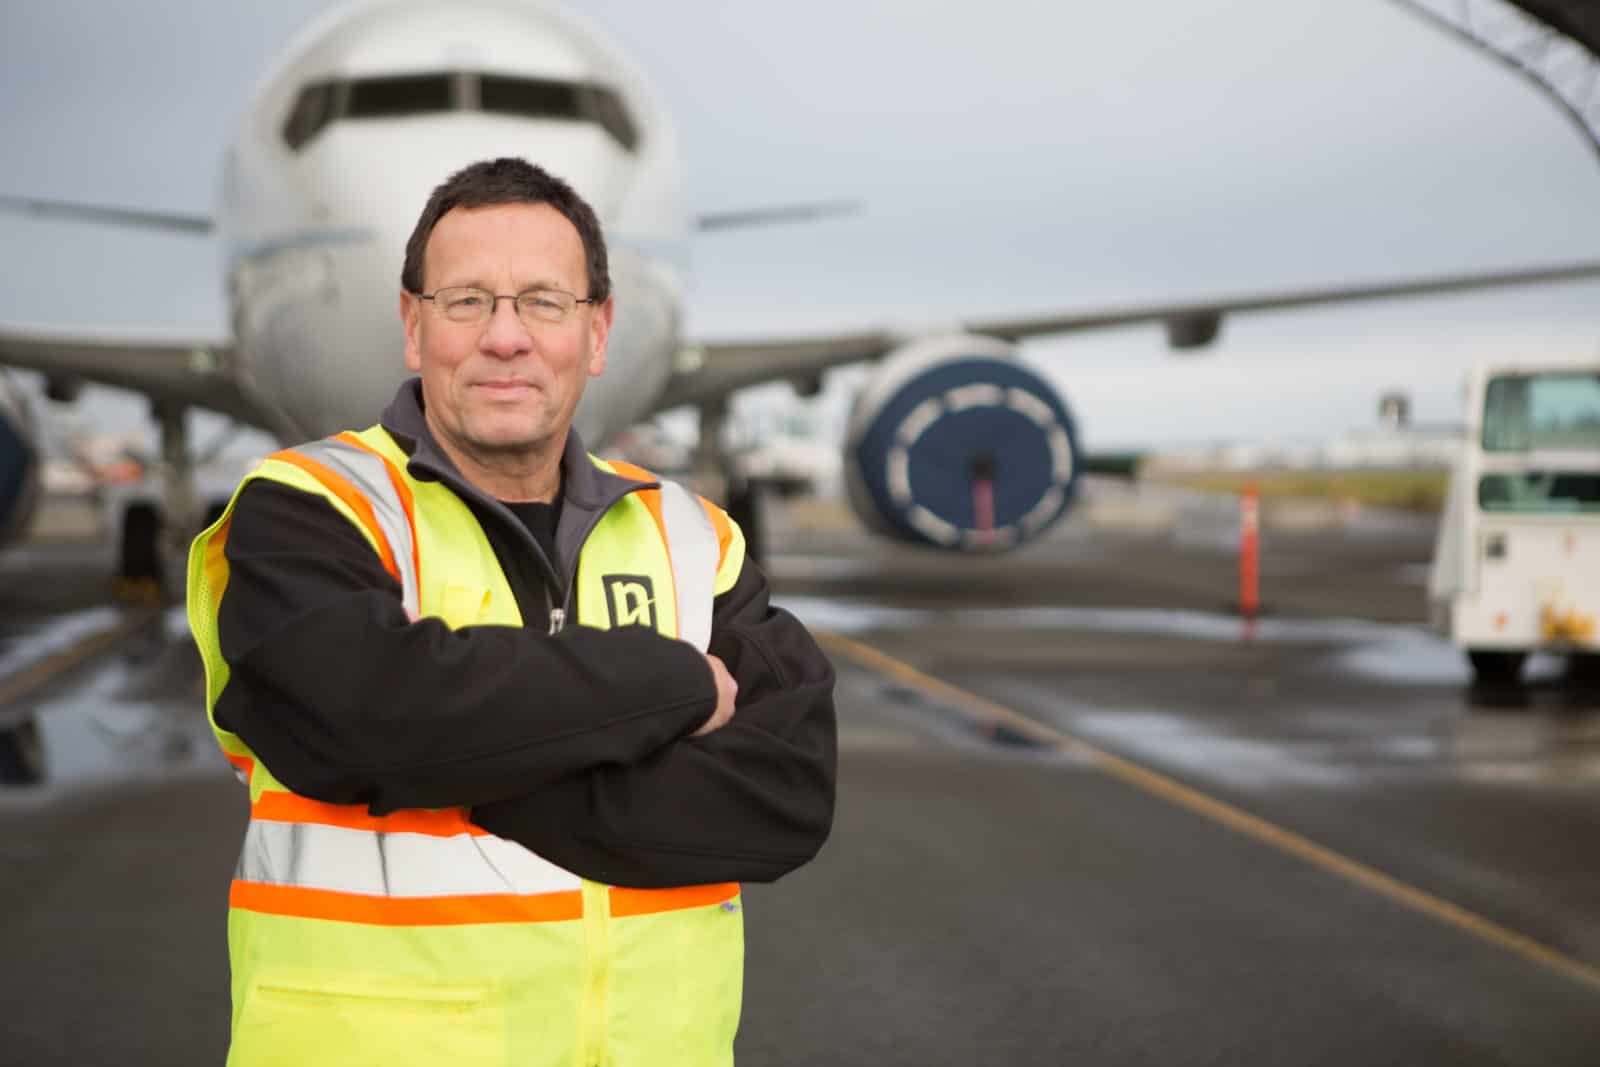 Parry crosses his arms in front of an airplane in a reflective yellow vest.